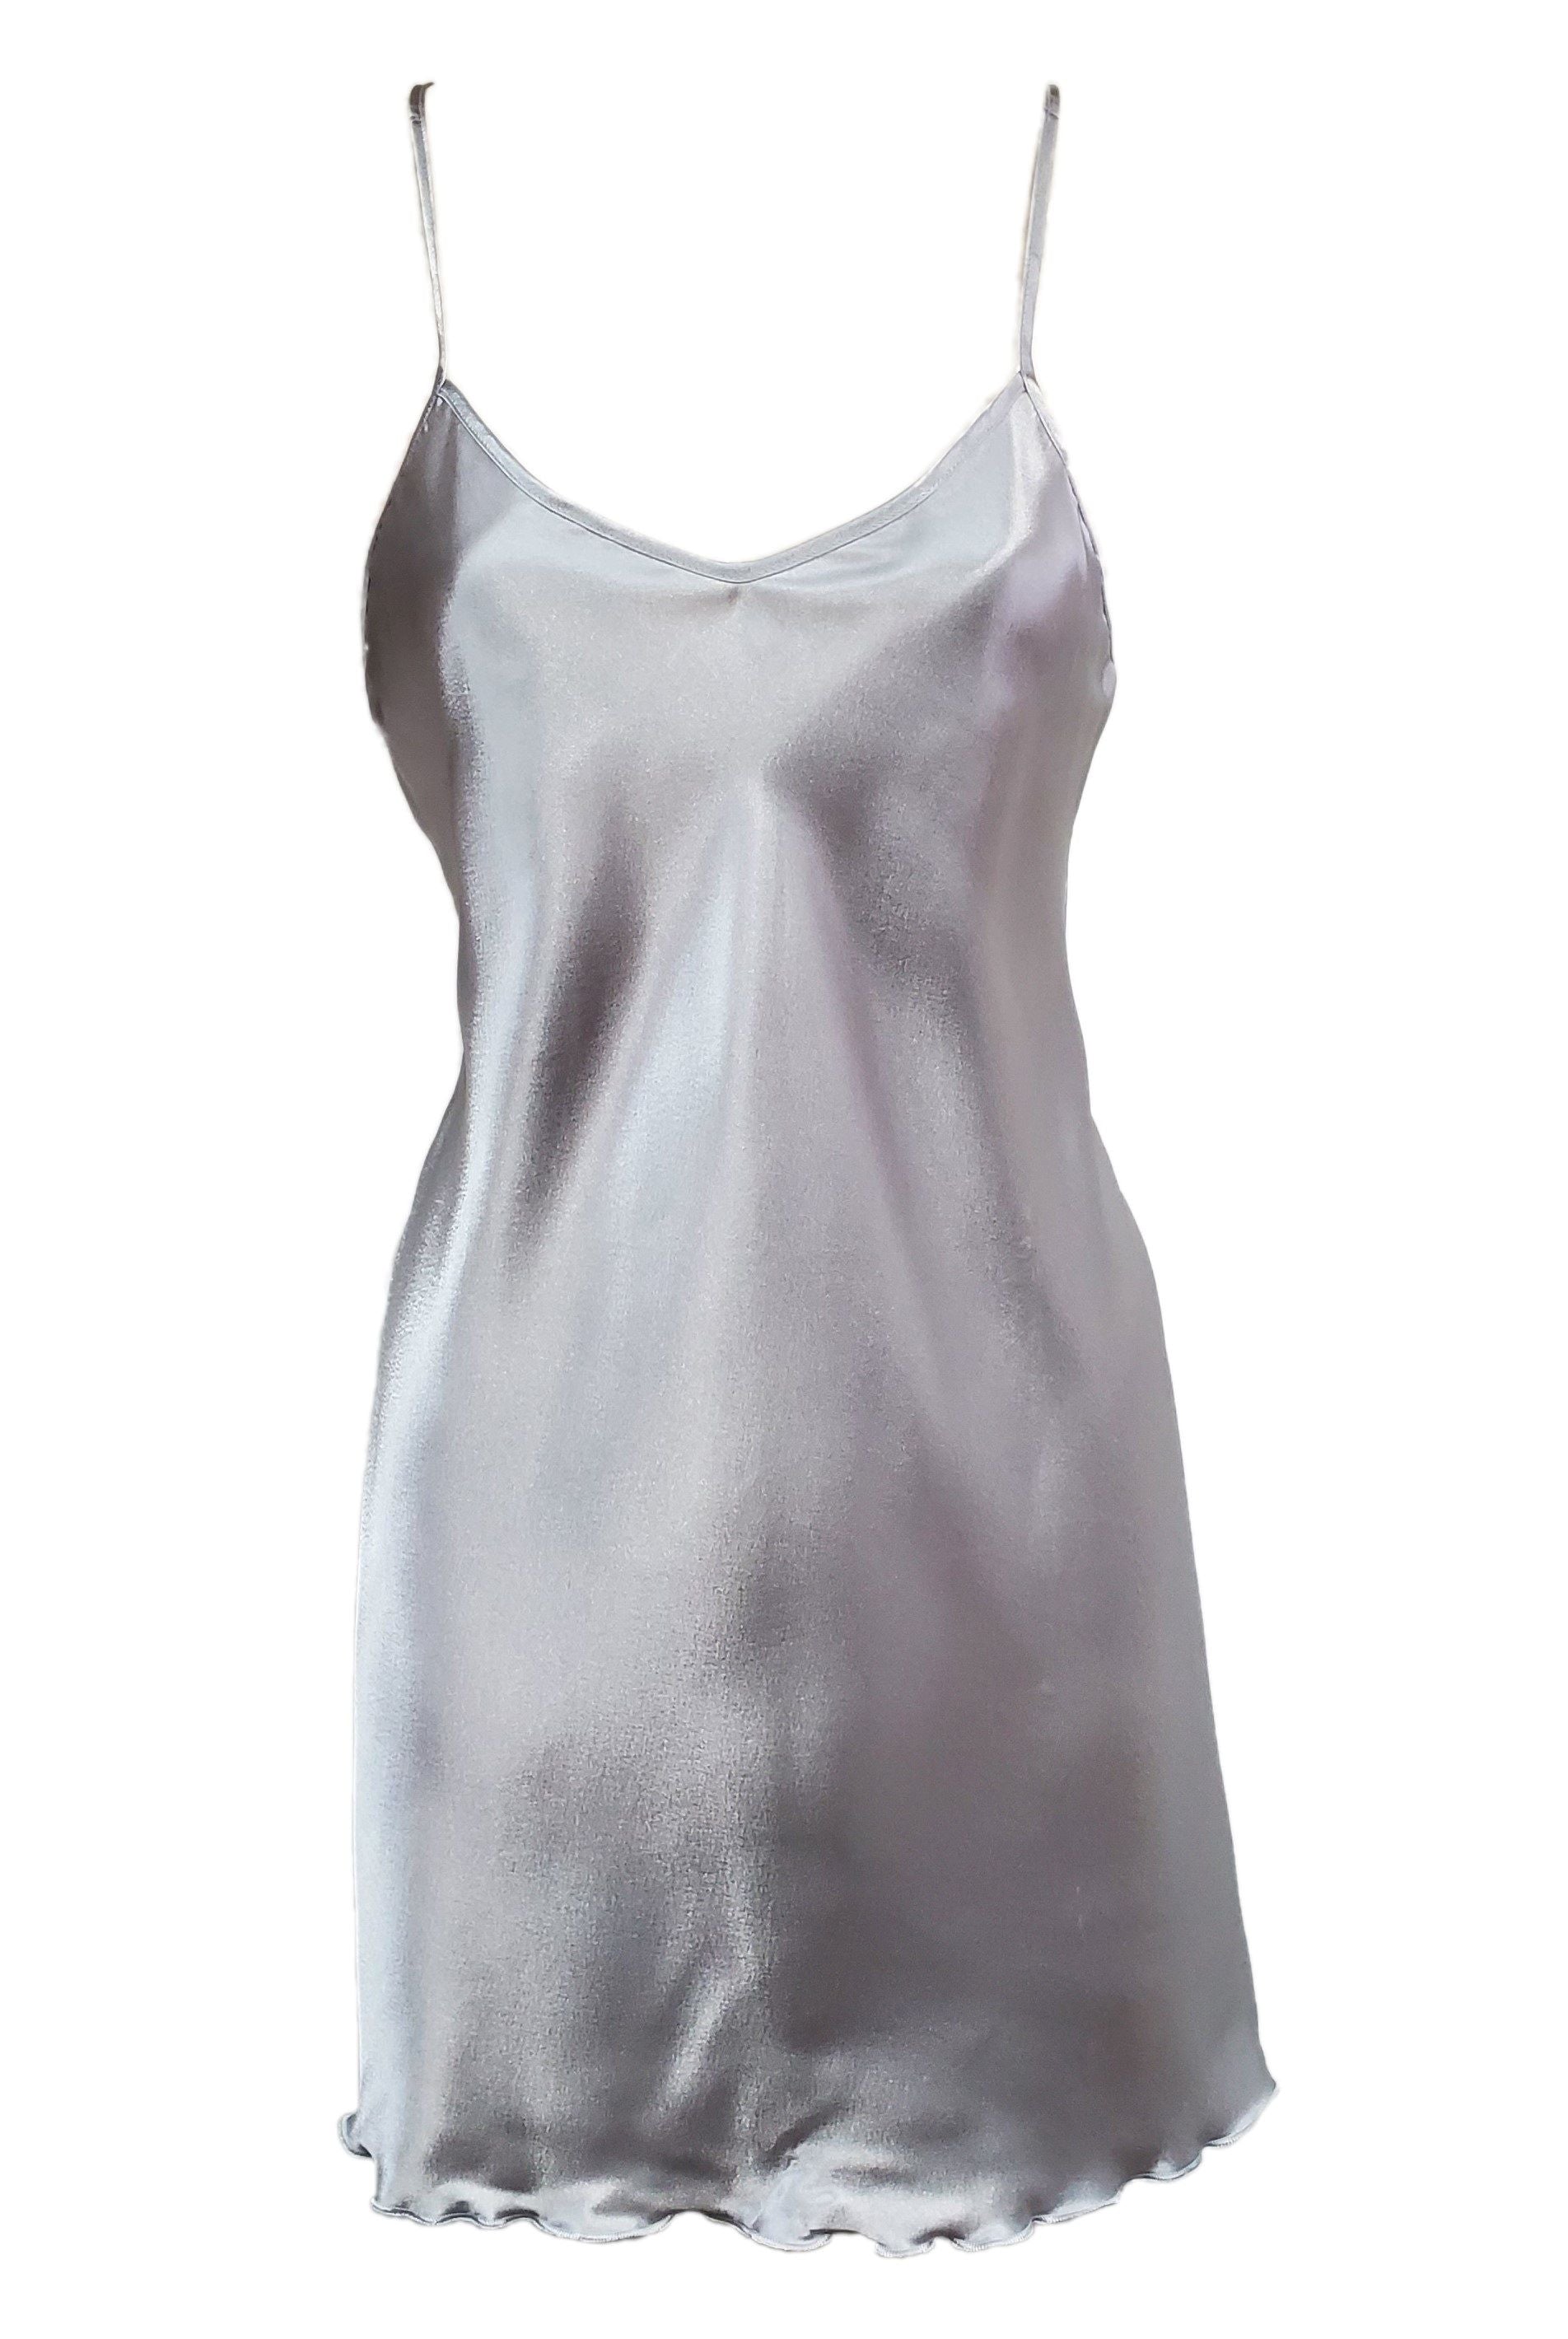 Classic and simple satin babydoll from the Basic line by Andra from Italy.